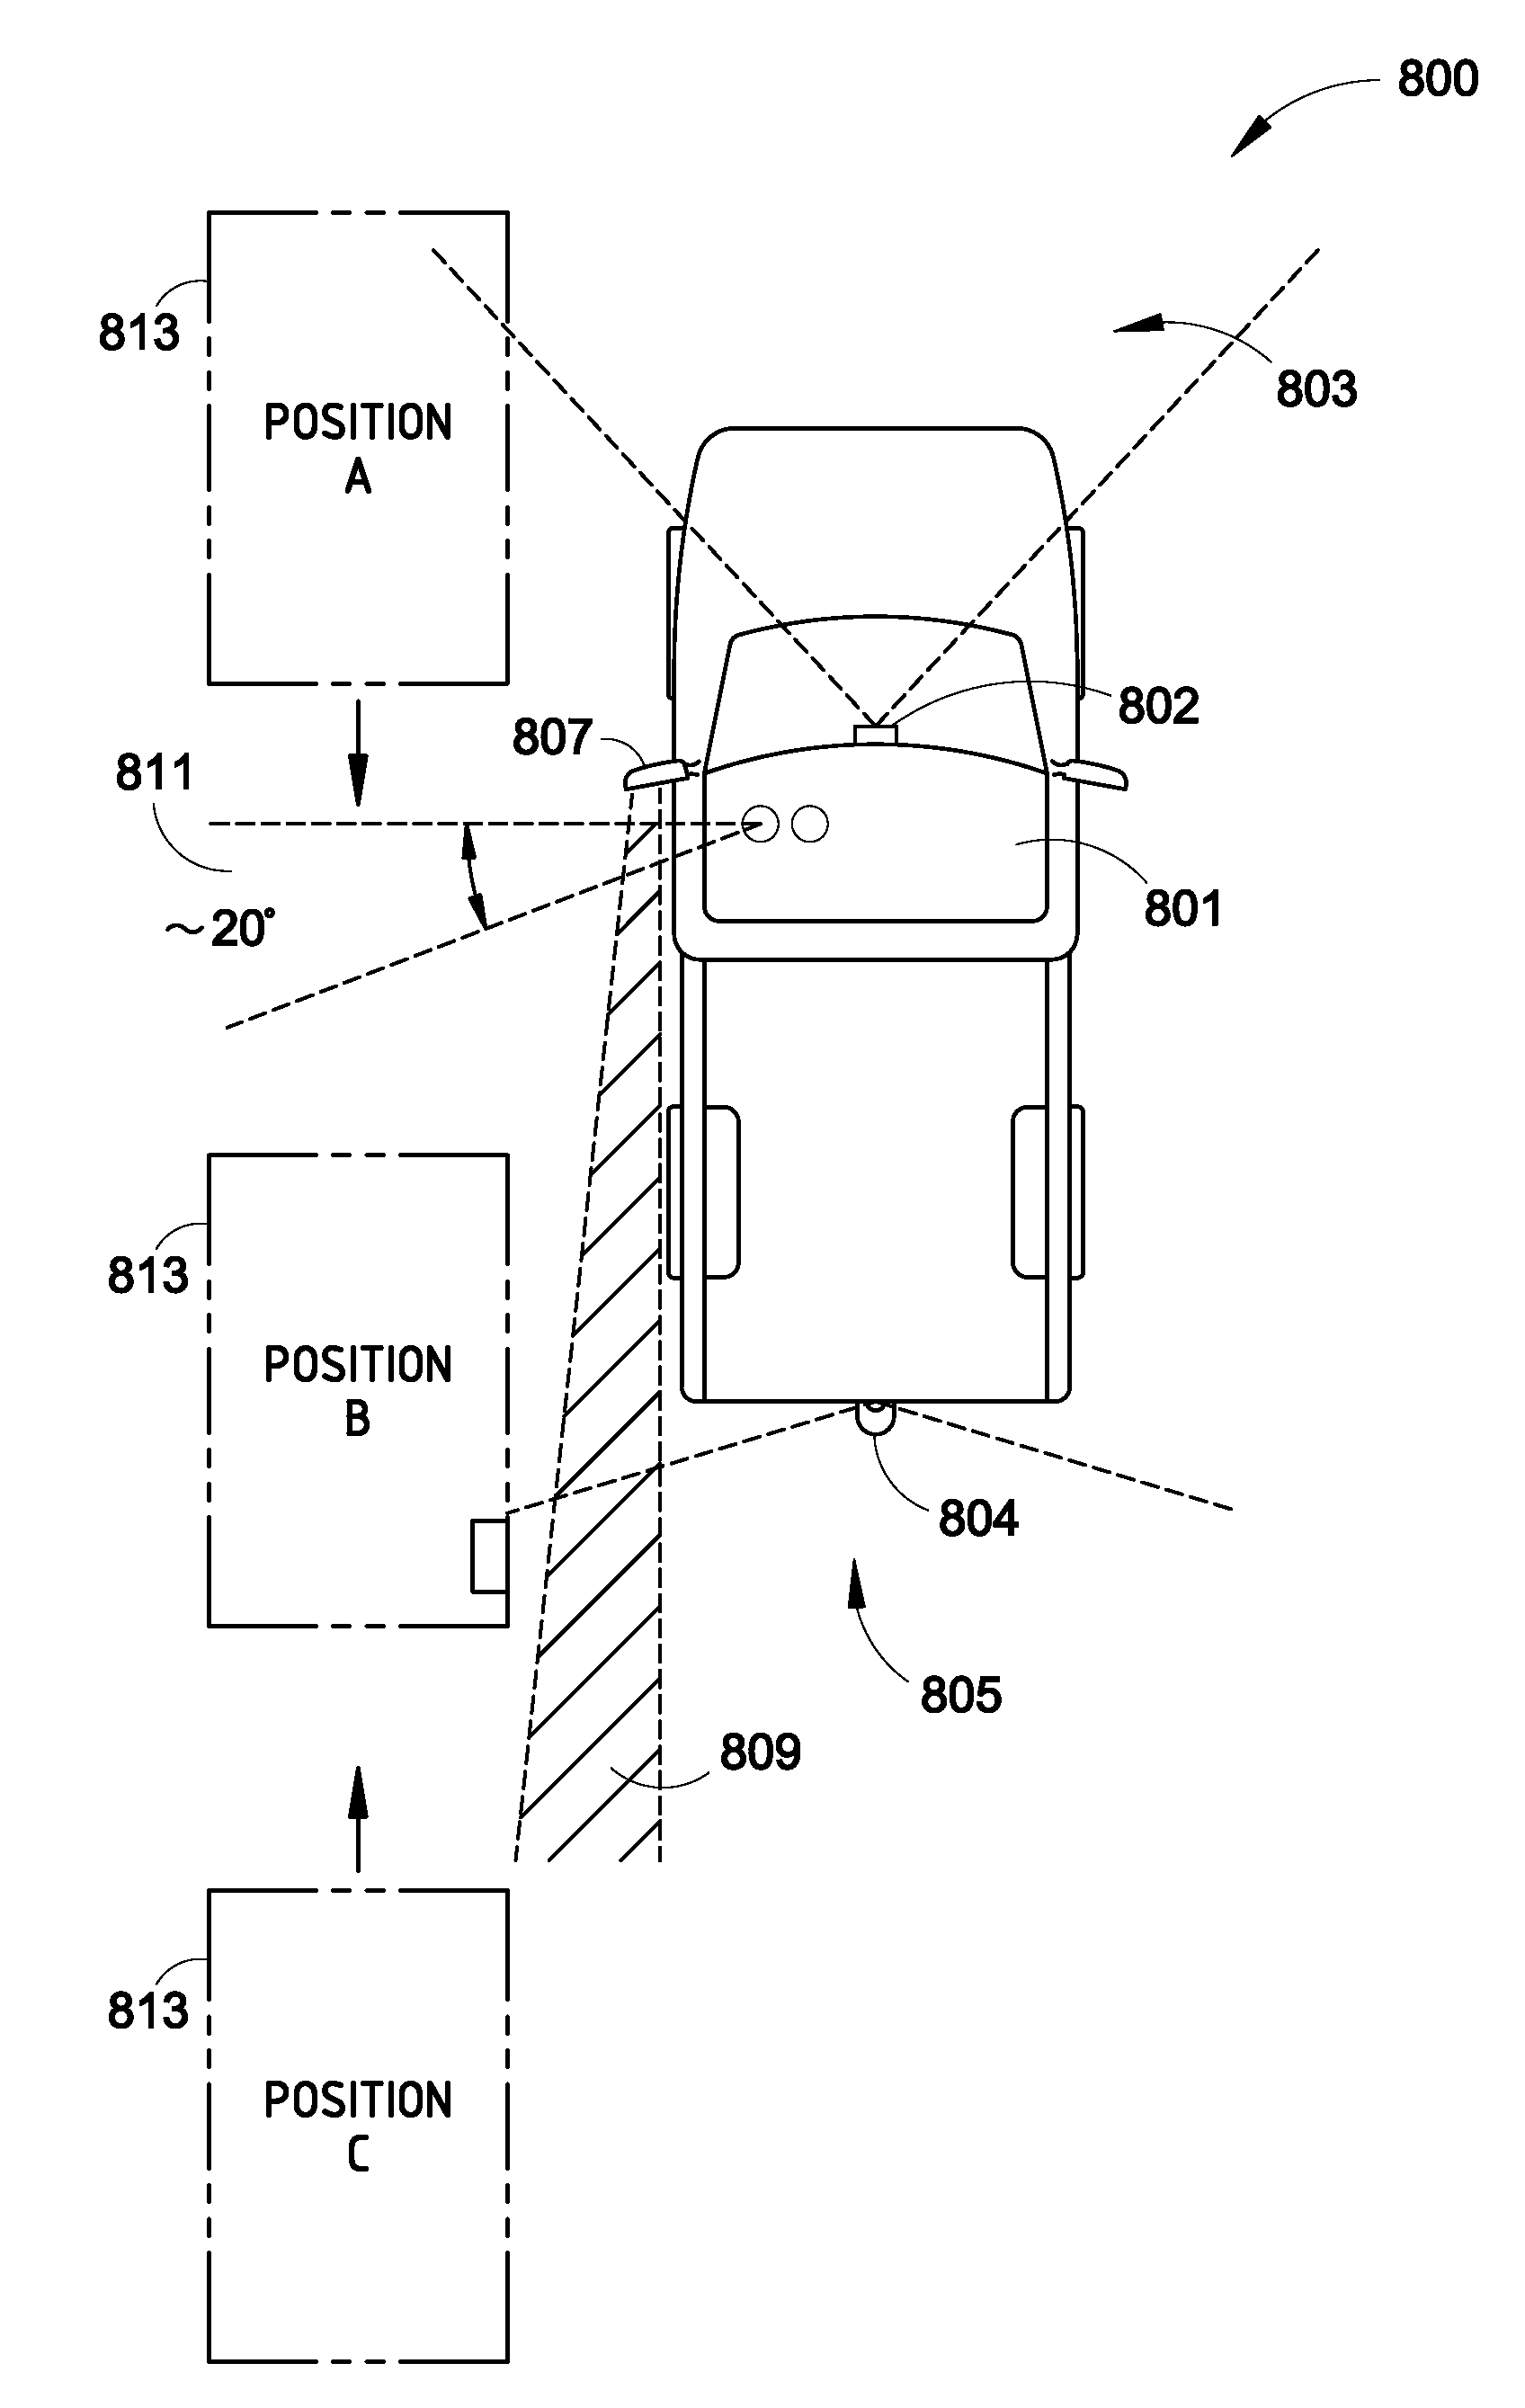 Blind spot detection system and method using preexisting vehicular imaging devices